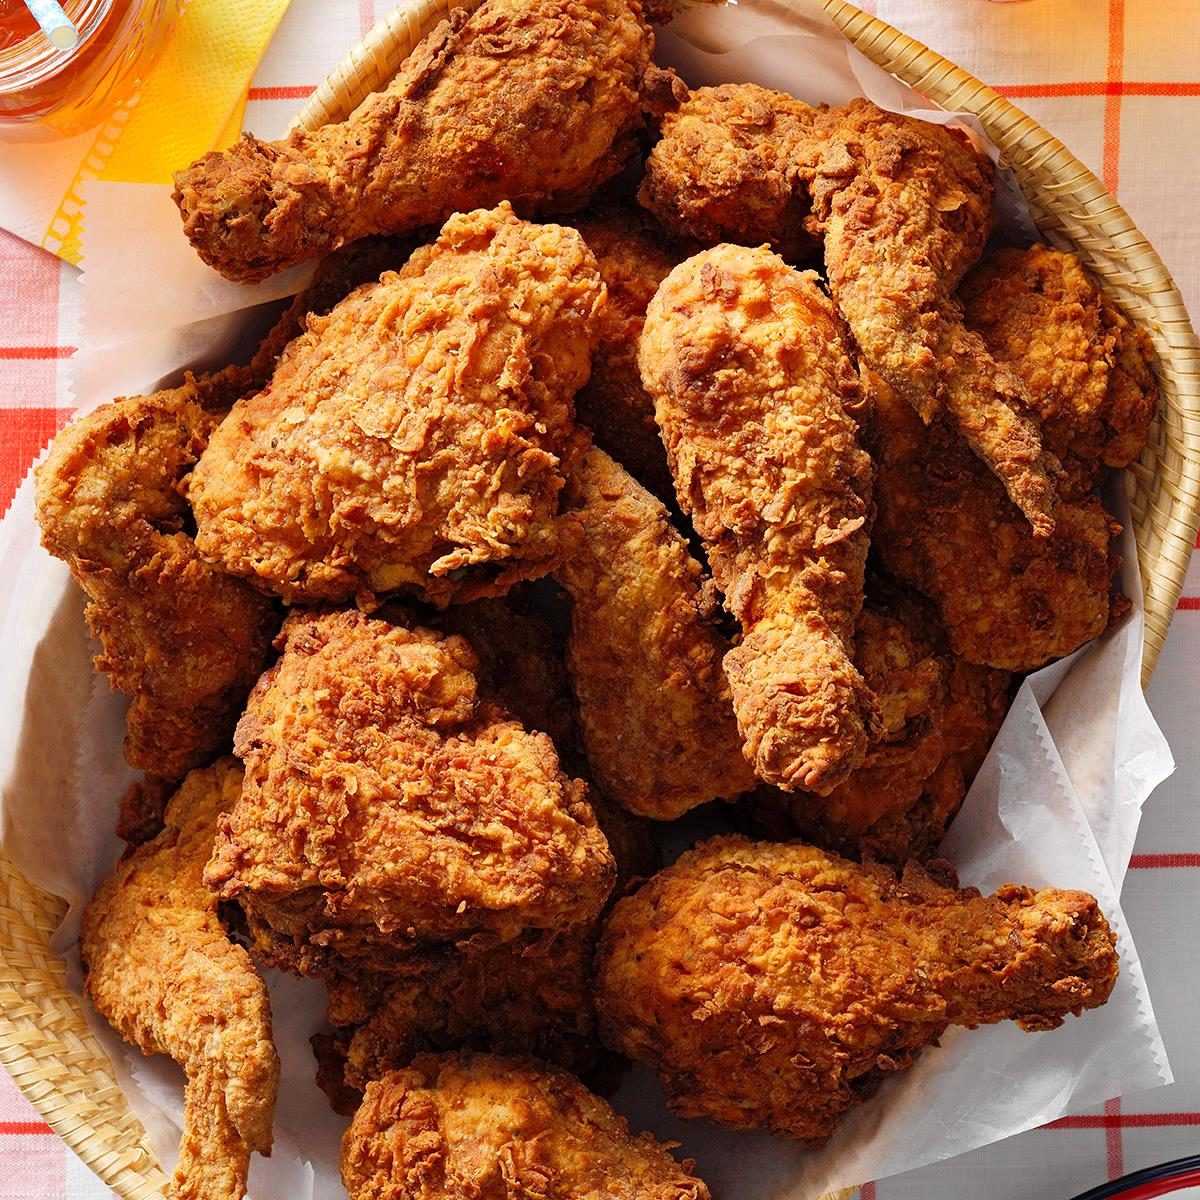 <p>If you've wanted to learn how to make crispy fried chicken, this is the recipe for you. Always a picnic favorite, this deep fried chicken recipe is delicious either hot or cold. Kids call it my Kentucky Fried Chicken! —Jeanne Schnitzler, Lima, Montana</p> <div class="listicle-page__buttons"> <div class="listicle-page__cta-button"><a href='https://www.tasteofhome.com/recipes/crispy-fried-chicken/'>Go to Recipe</a></div> </div> <p>Learn the <a href="https://www.tasteofhome.com/article/kfcs-secret-recipe-crispy-fried-chicken/">secret to KFC fried chicken</a>—which goes beyond its 11-spice seasoning blend. Then, make more <a href="https://www.tasteofhome.com/collection/kfc-copycat-recipes/">KFC copycat recipes</a>.</p>